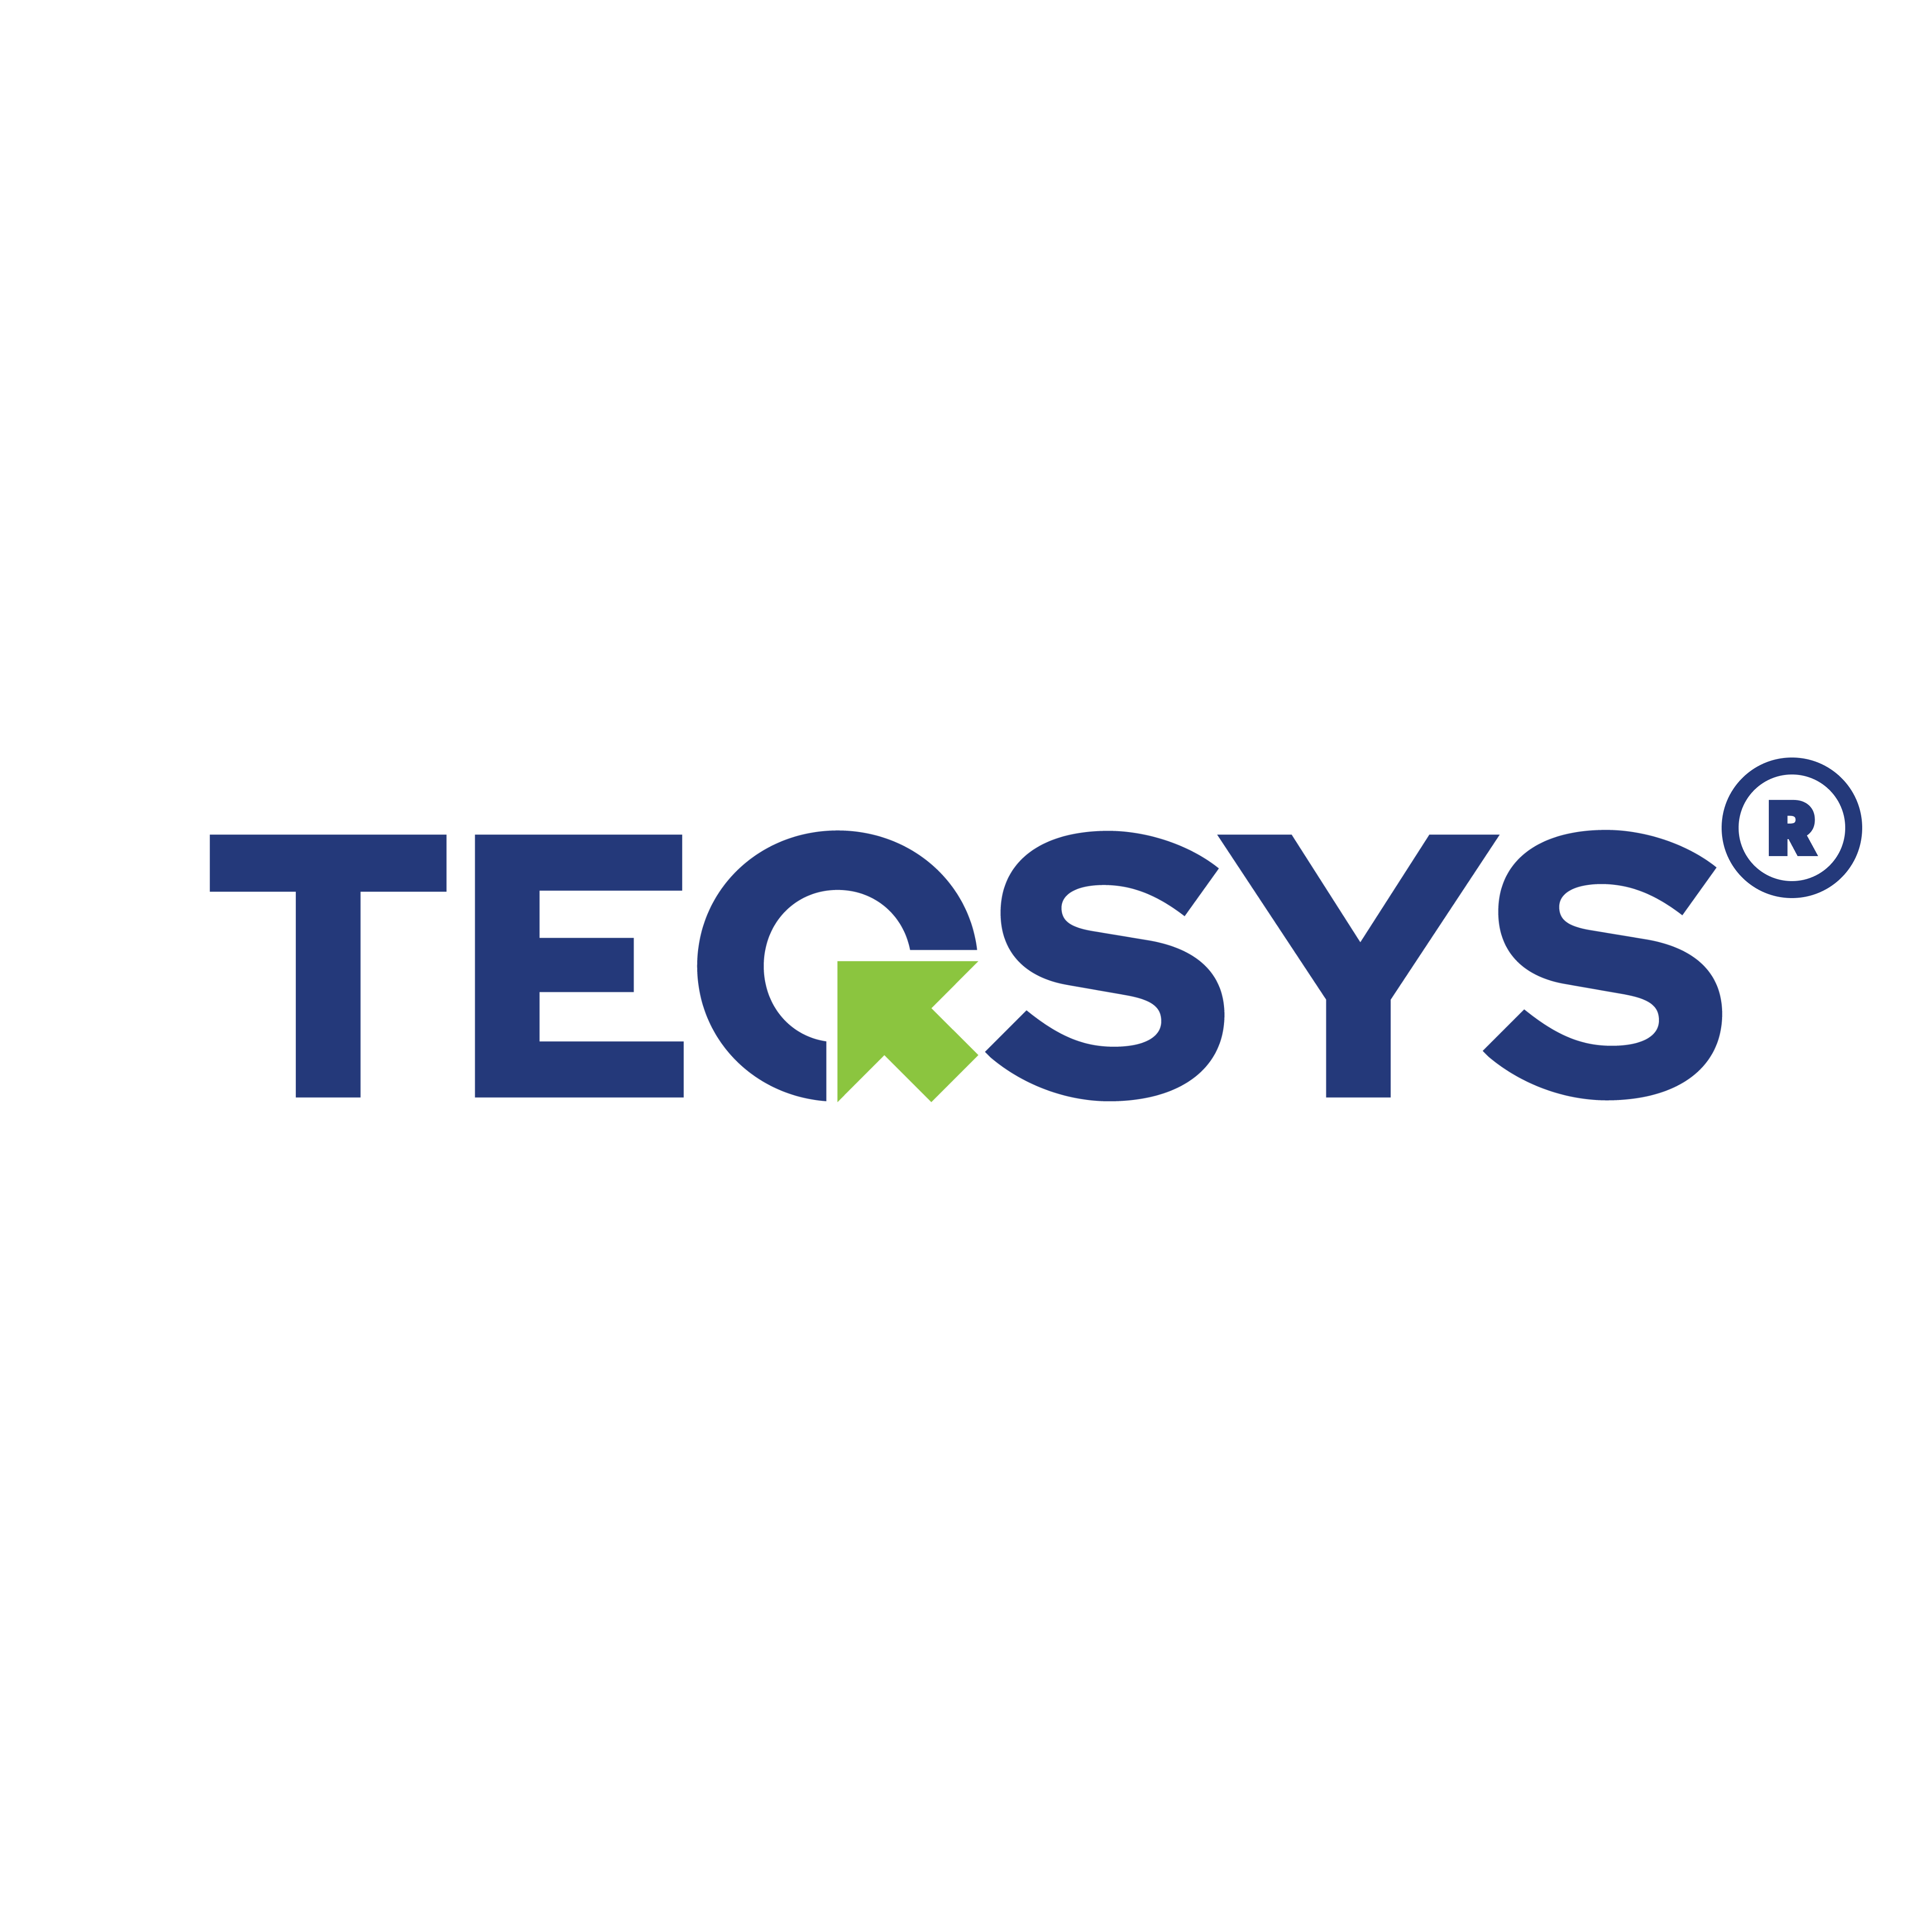 Teqsys